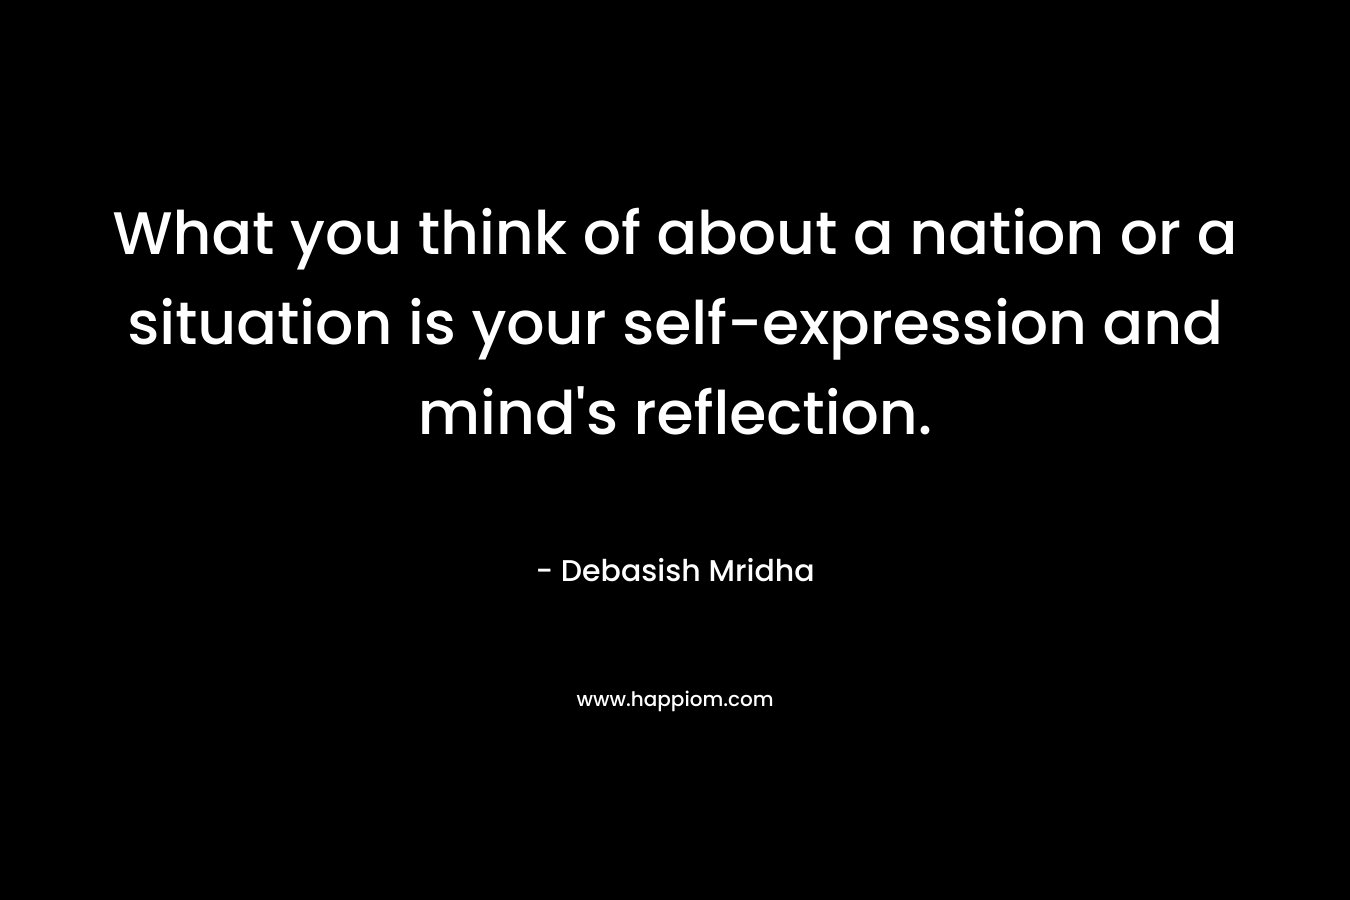 What you think of about a nation or a situation is your self-expression and mind's reflection.